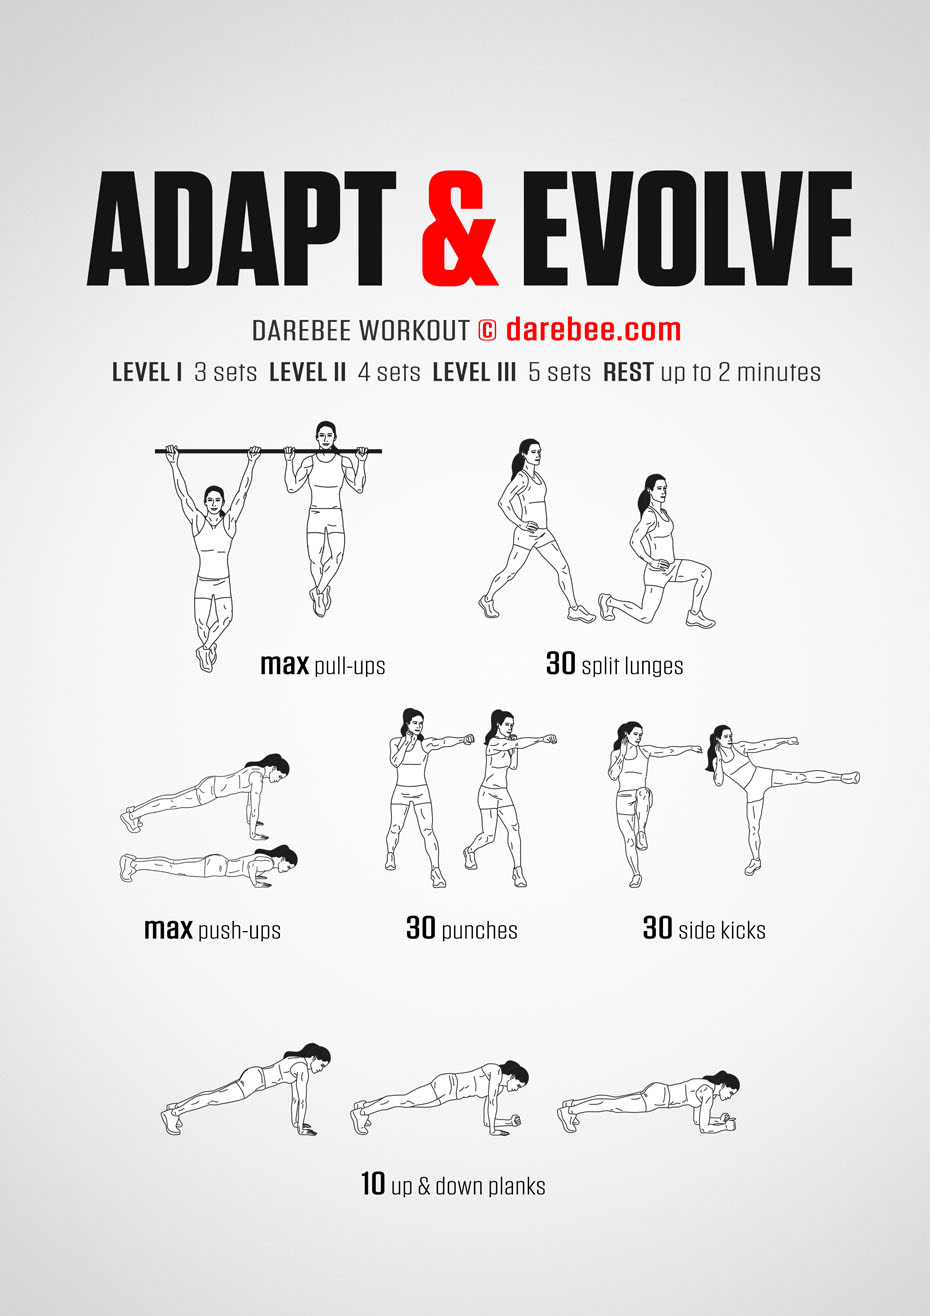 https://darebee.com/images/workouts/adapt-and-evolve-workout.jpg